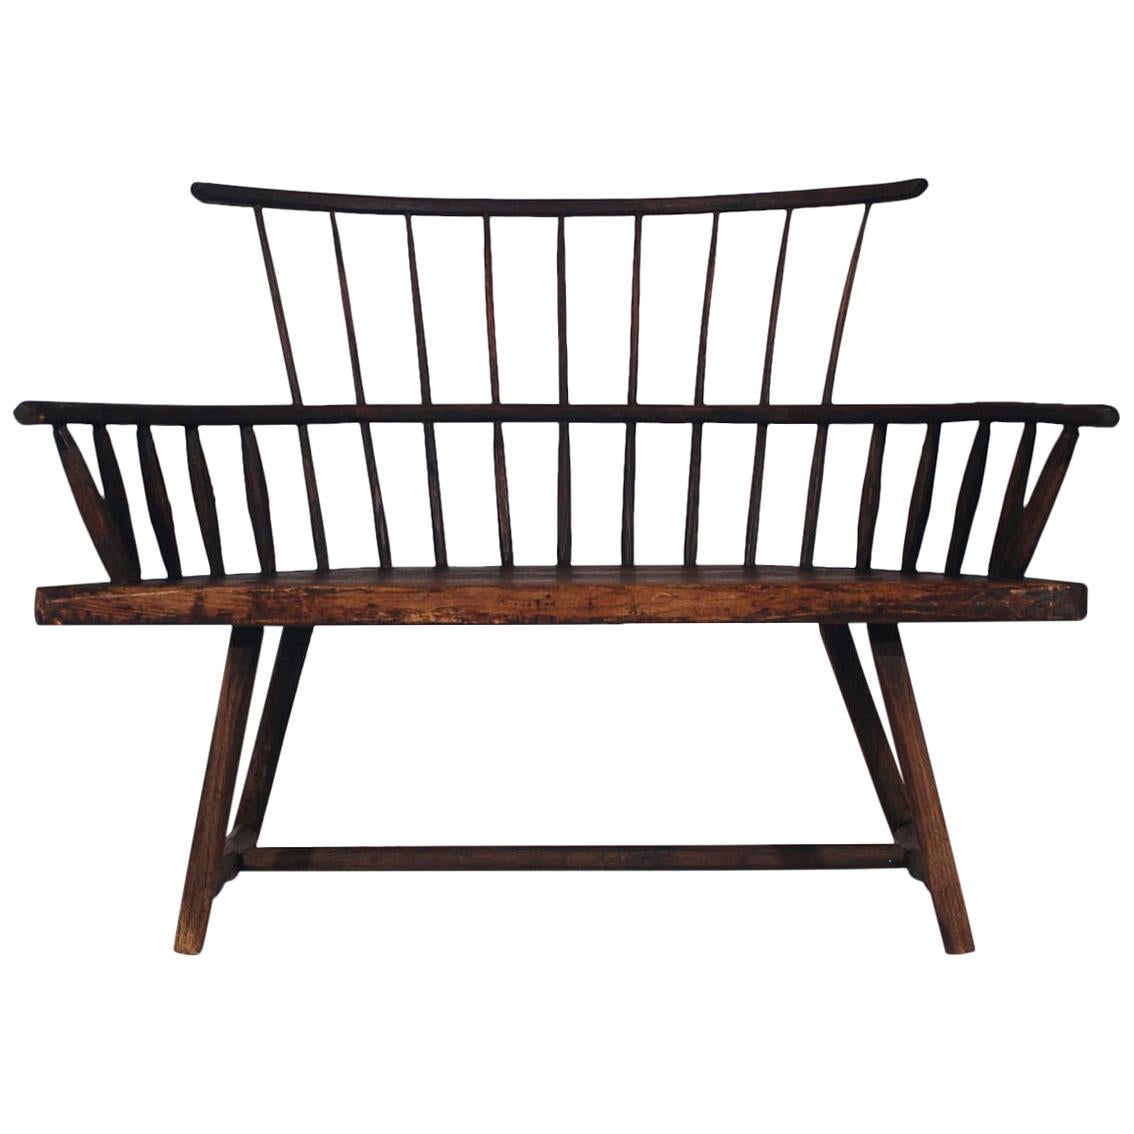 Antique Spindle Back Windsor Bench in Pine with a Modern Form